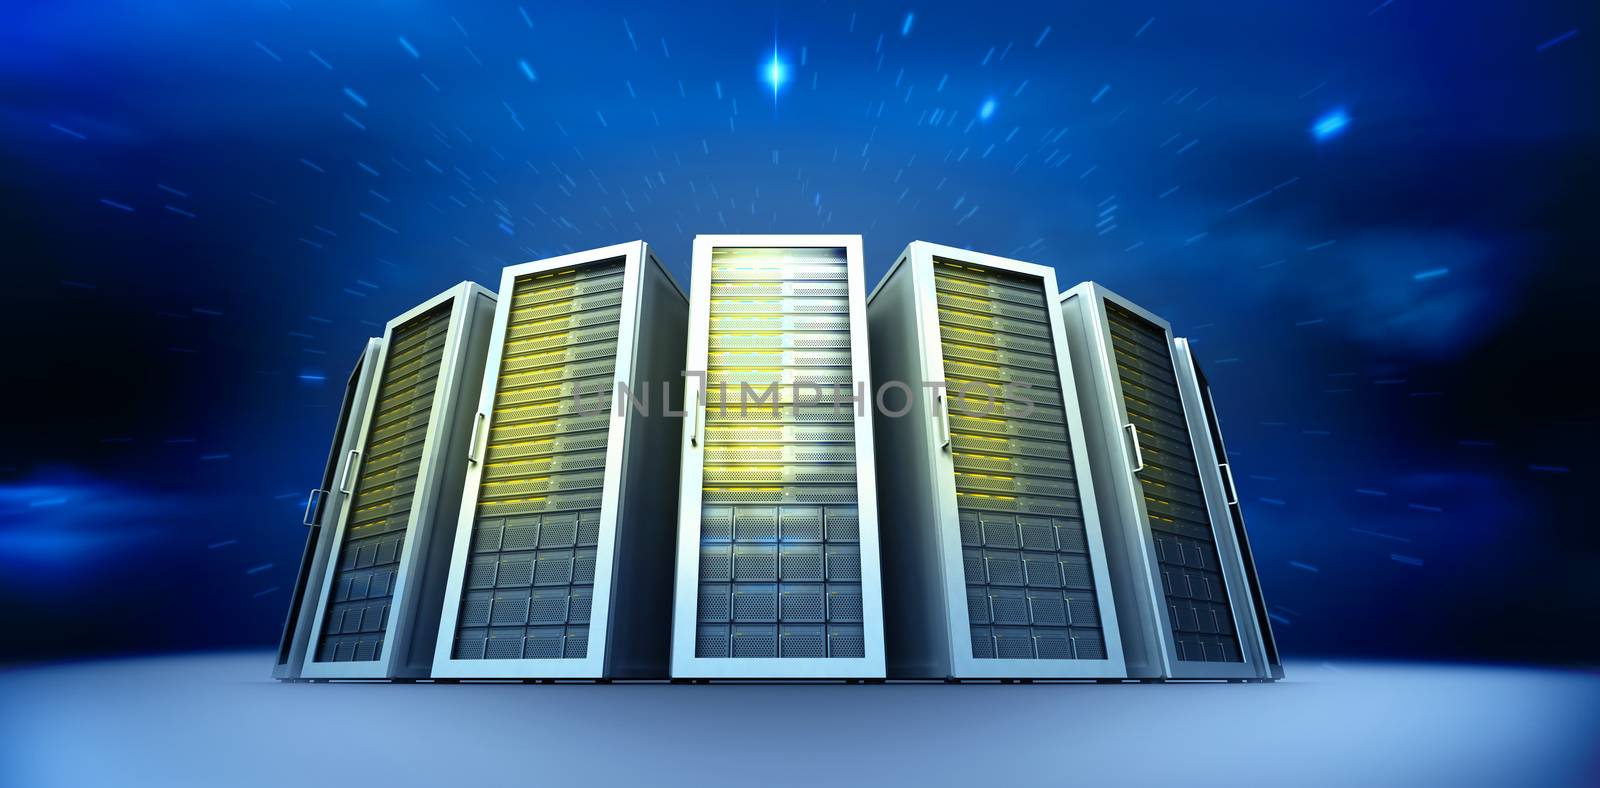 Server towers against stars twinkling in night sky